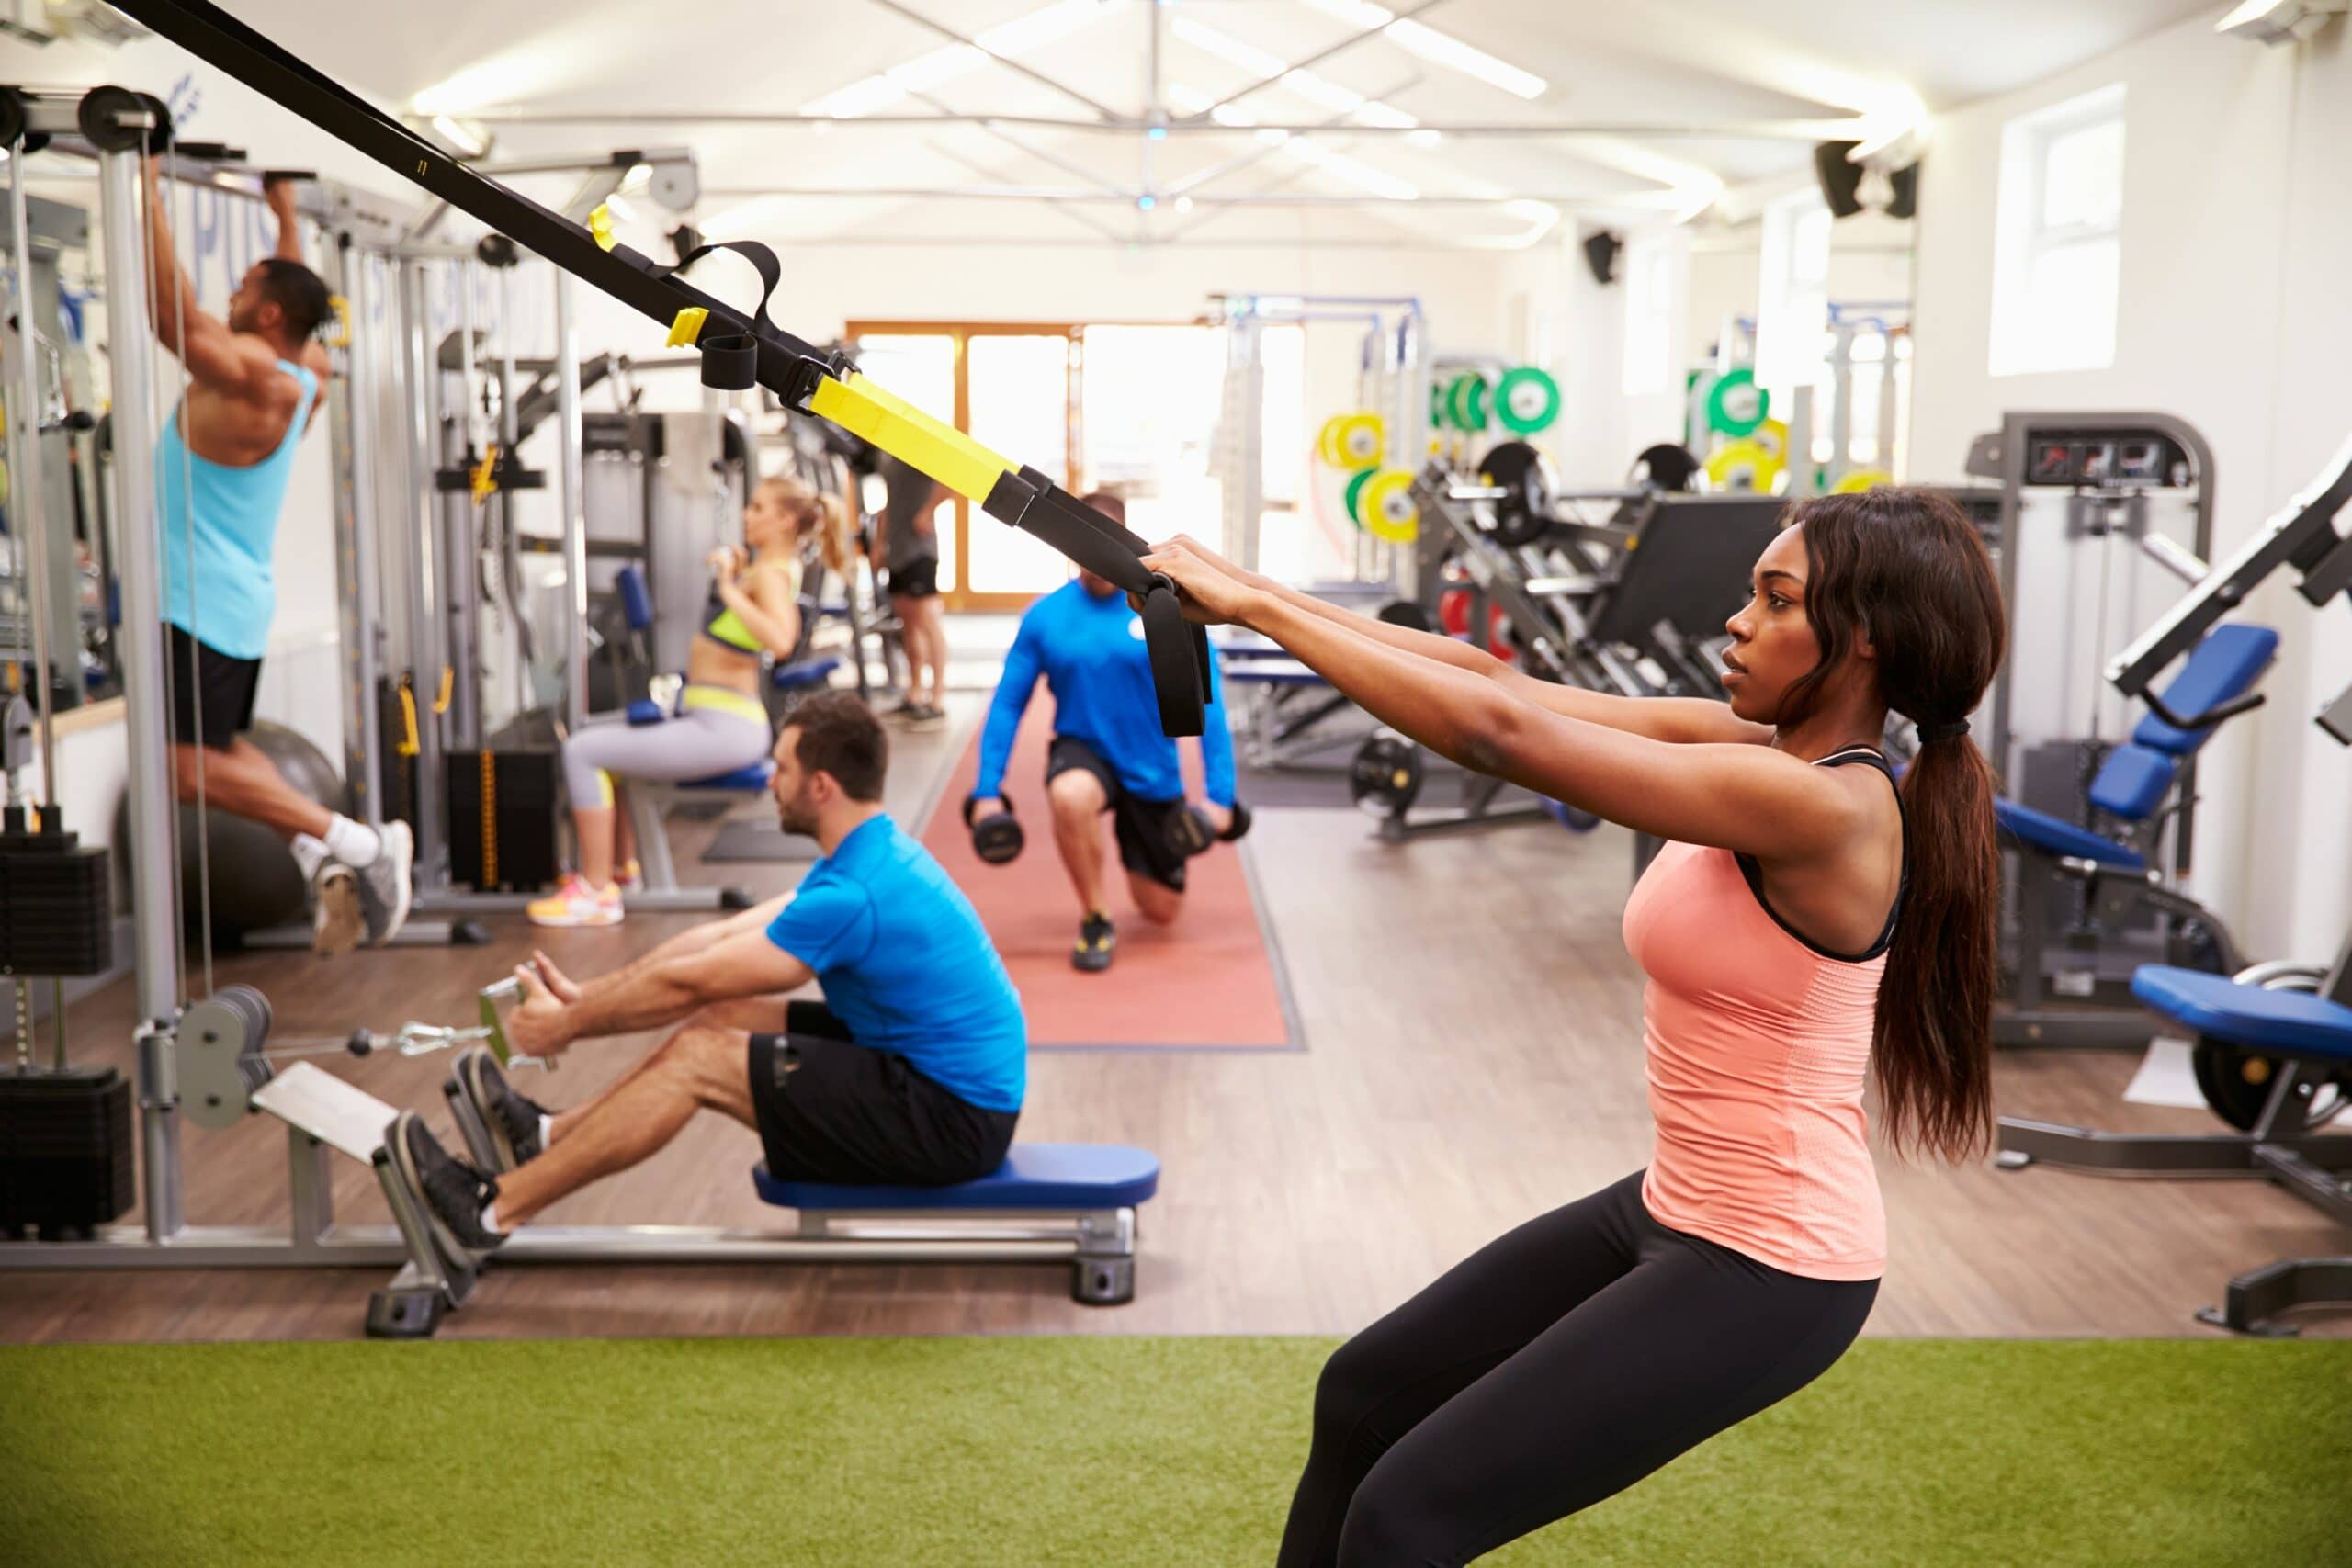 8 etiquette and hygiene tips for staying safe at the gym